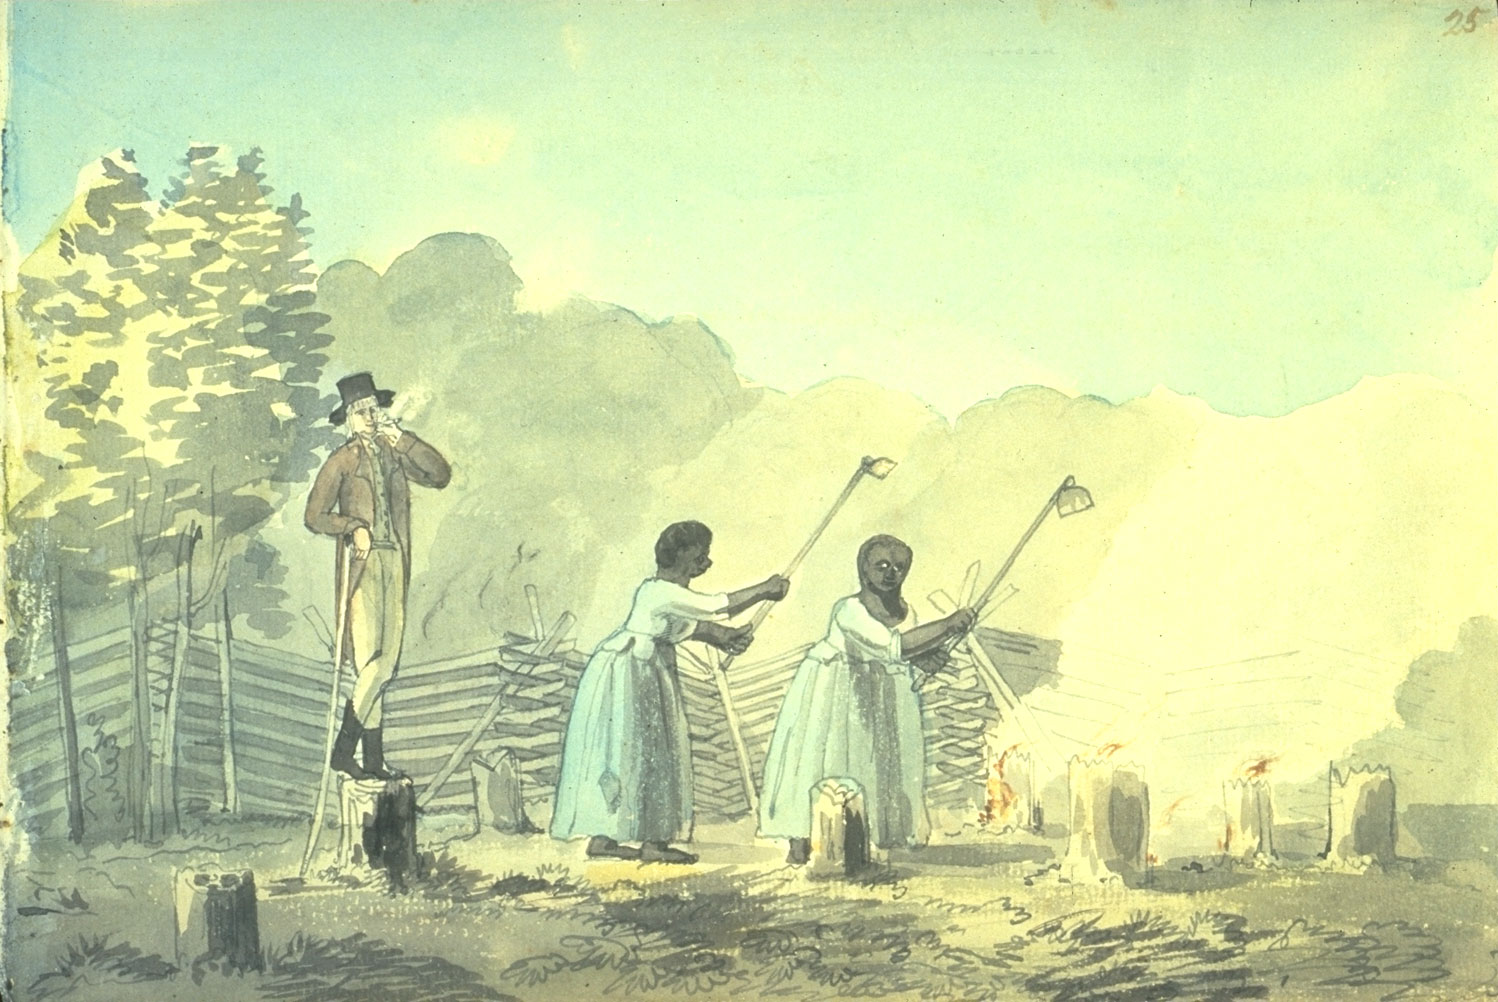 Watercolor illustration of enslaved women working in a tobacco field from 1798. The illustration shows two Black women wearing light blue dresses and holding hoes. The are in a field full of stumps. A white man with a whip or switch stands on one of the stumps with his legs crossed, watching over the women. A fence and trees can be seen in the background.